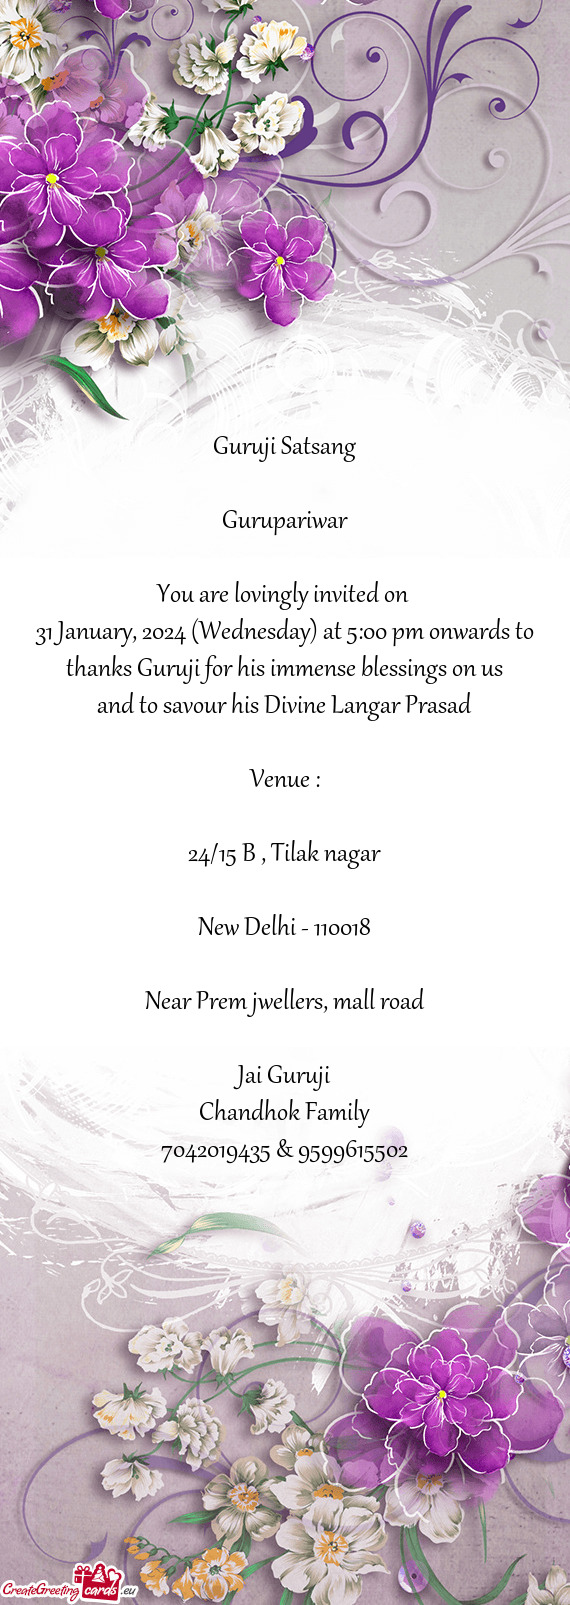 31 January, 2024 (Wednesday) at 5:00 pm onwards to thanks Guruji for his immense blessings on us